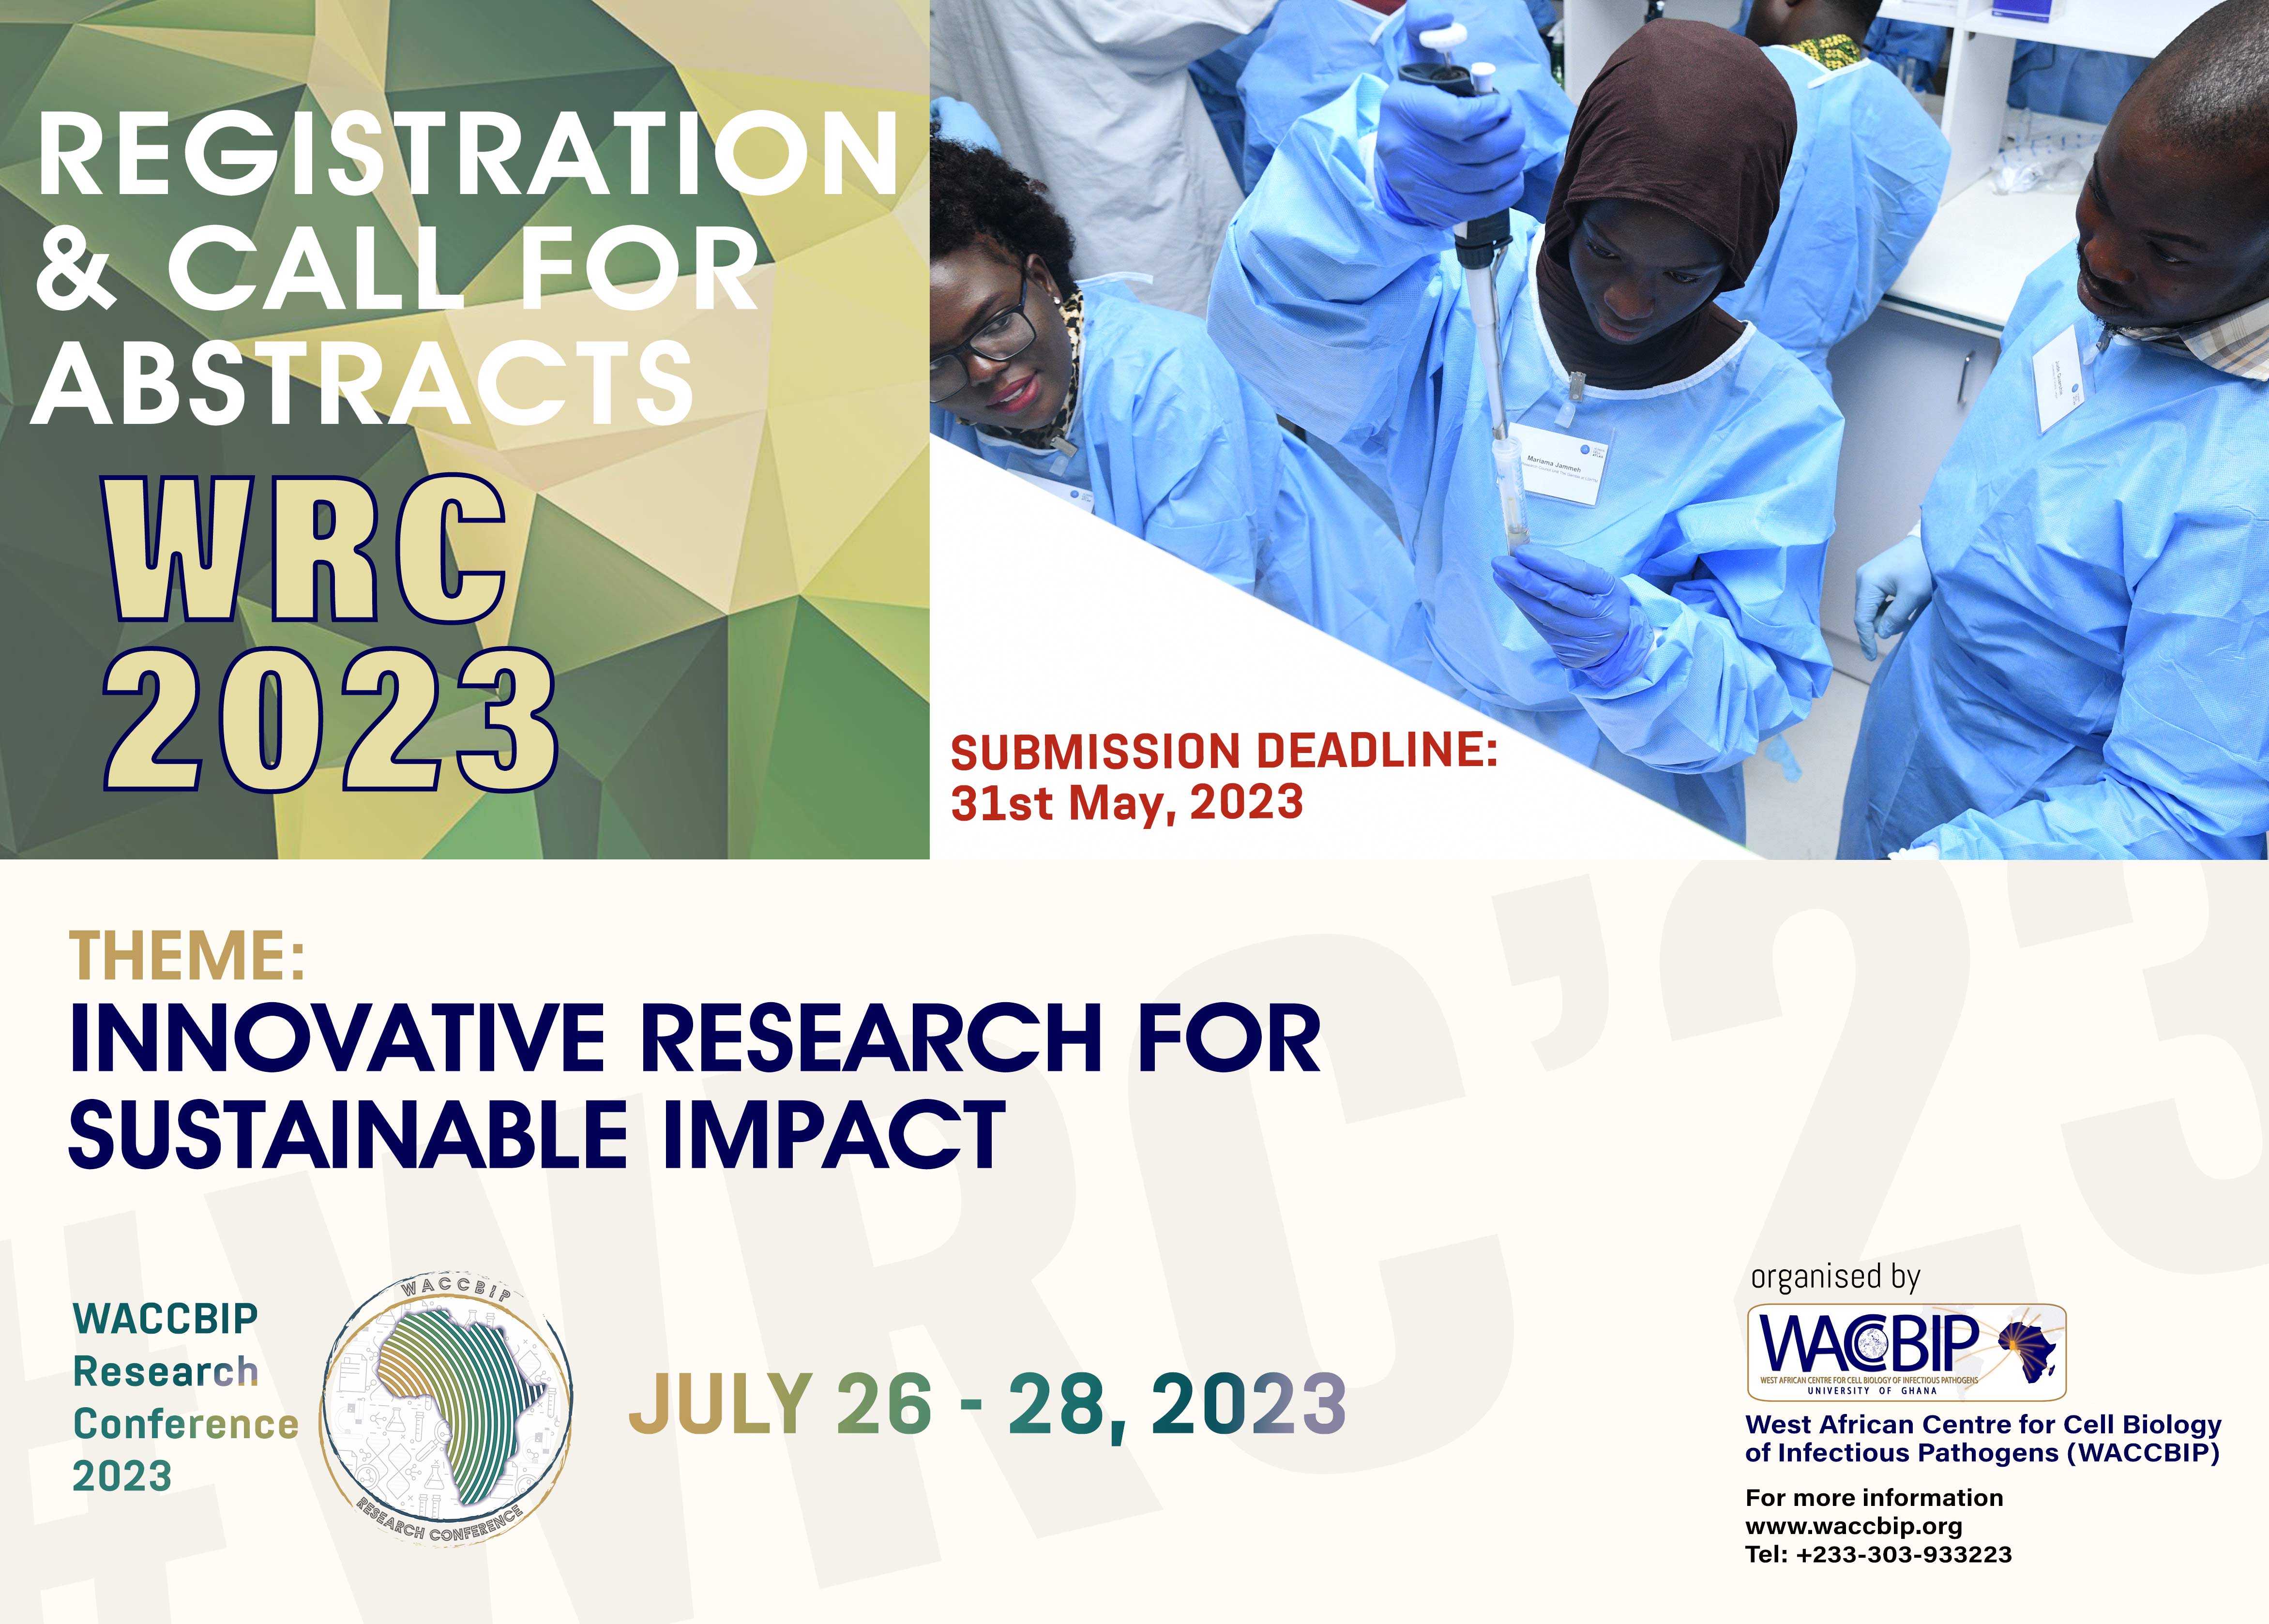 WACCBIP Research Conference 2023 Registration and Call for Abstracts